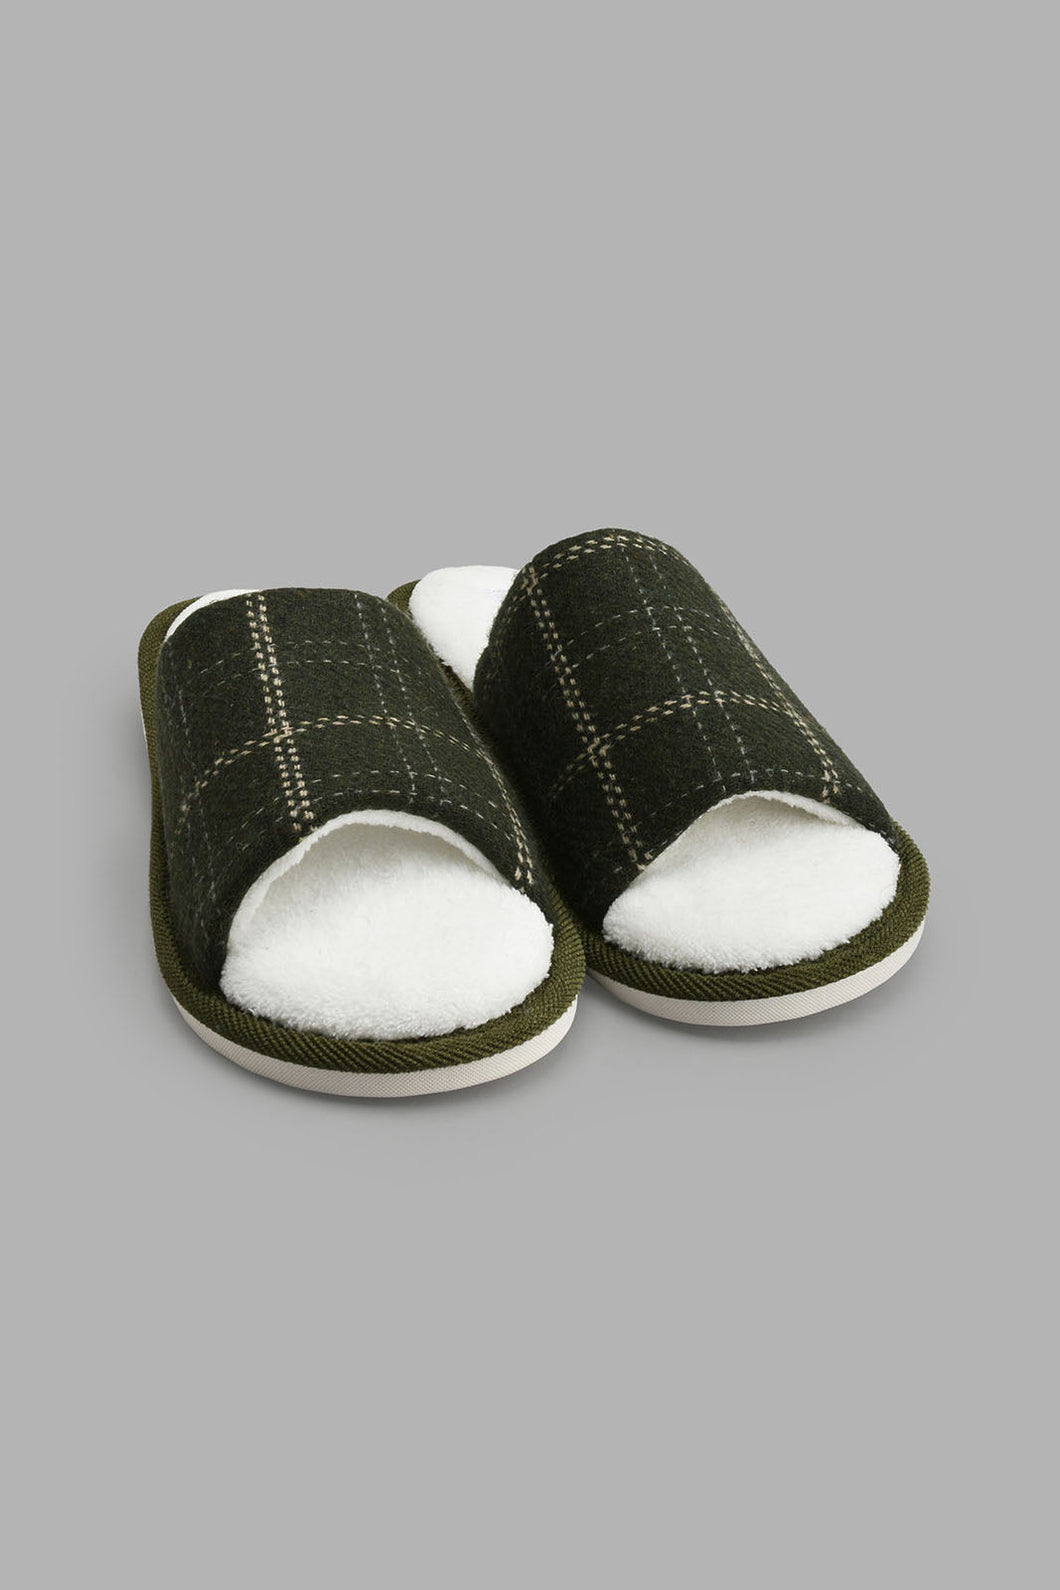 Olive Checkered Quilted Slipper شبشب كاروهات مبطن باللون الزيتي